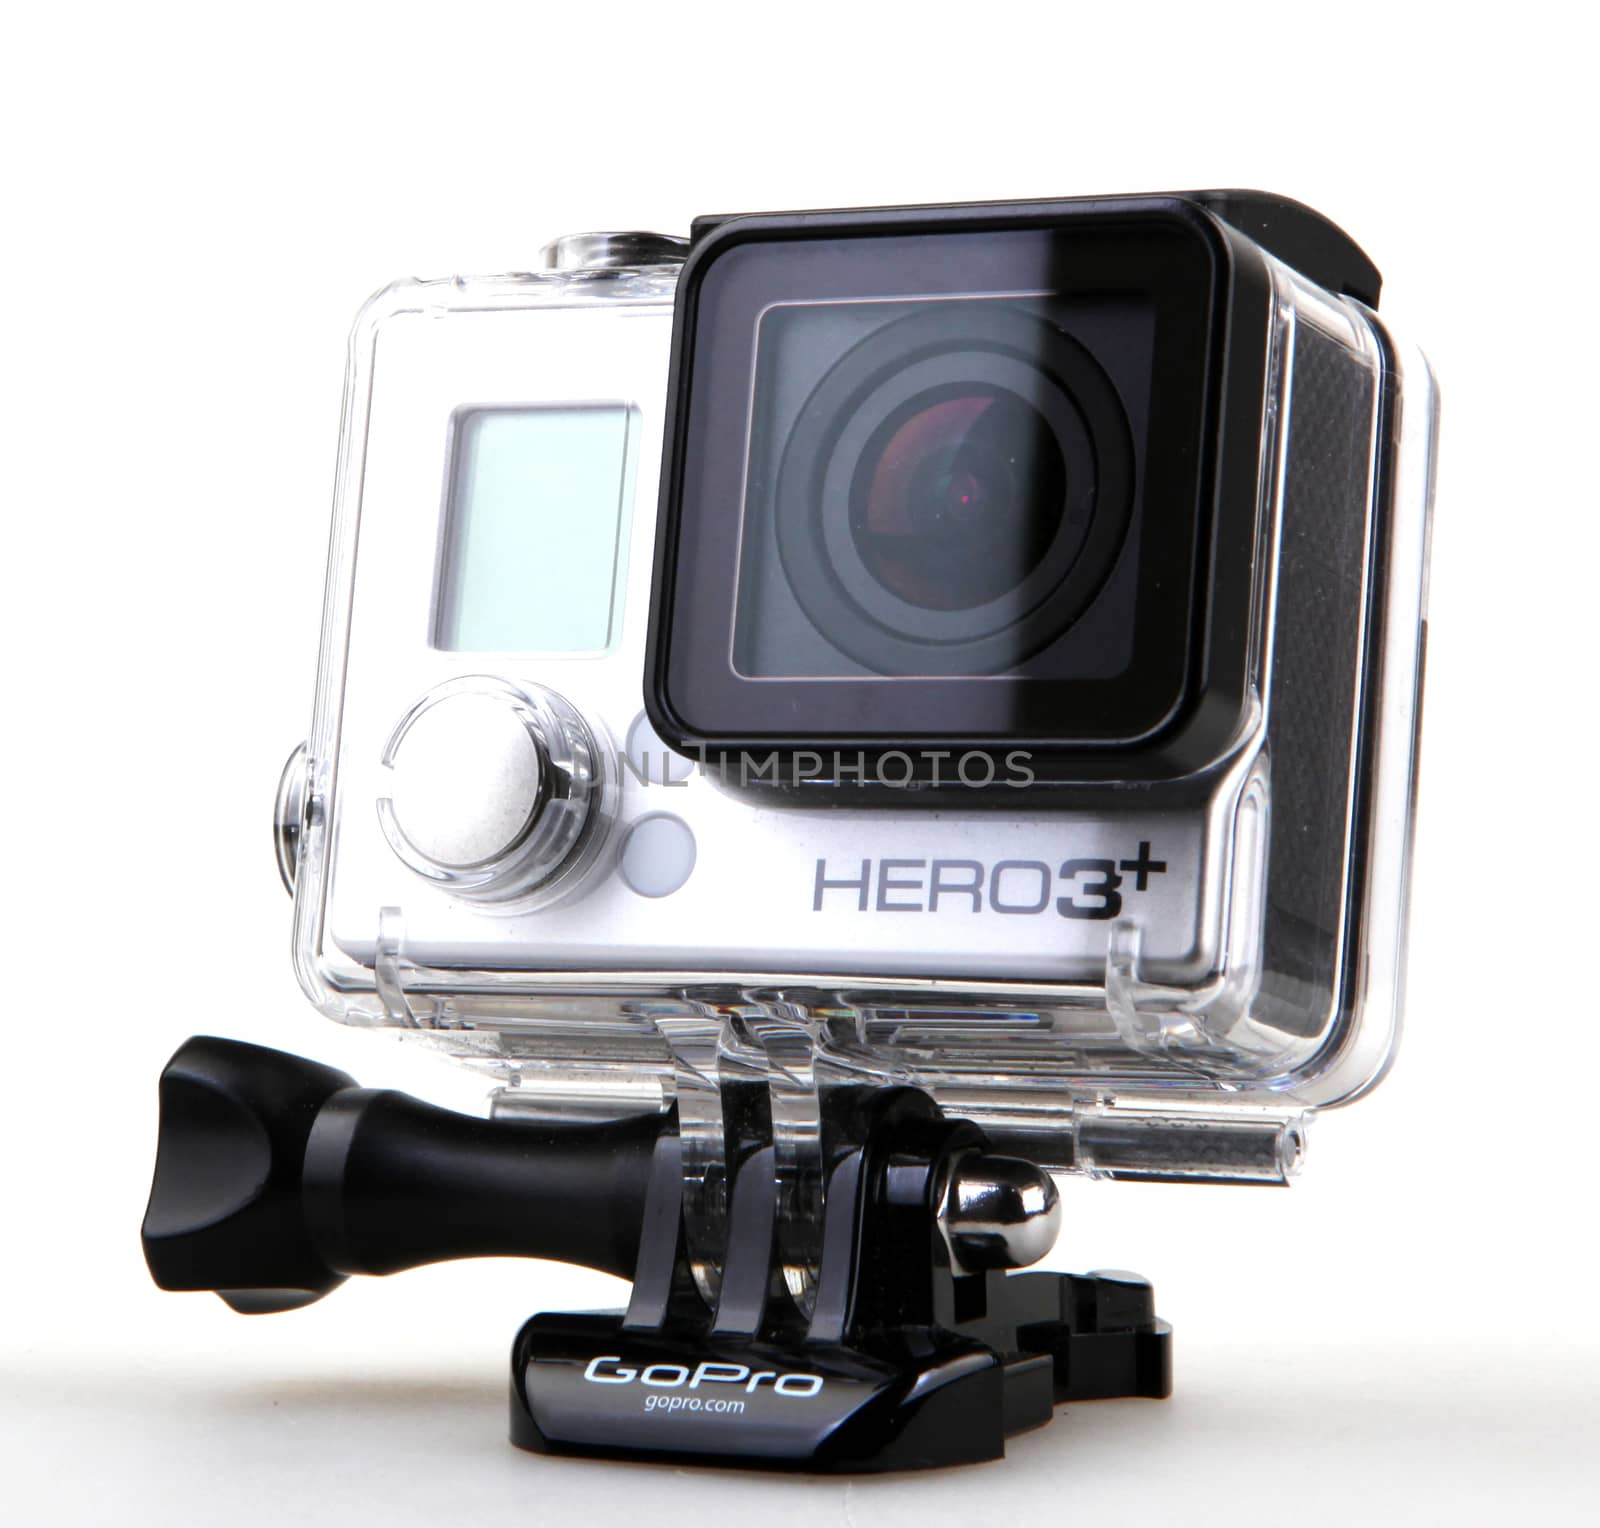 AYTOS, BULGARIA - MARCH 12, 2016: GoPro HERO3+ Black Edition isolated on white background. GoPro is a brand of high-definition personal cameras, often used in extreme action video photography. by nenov